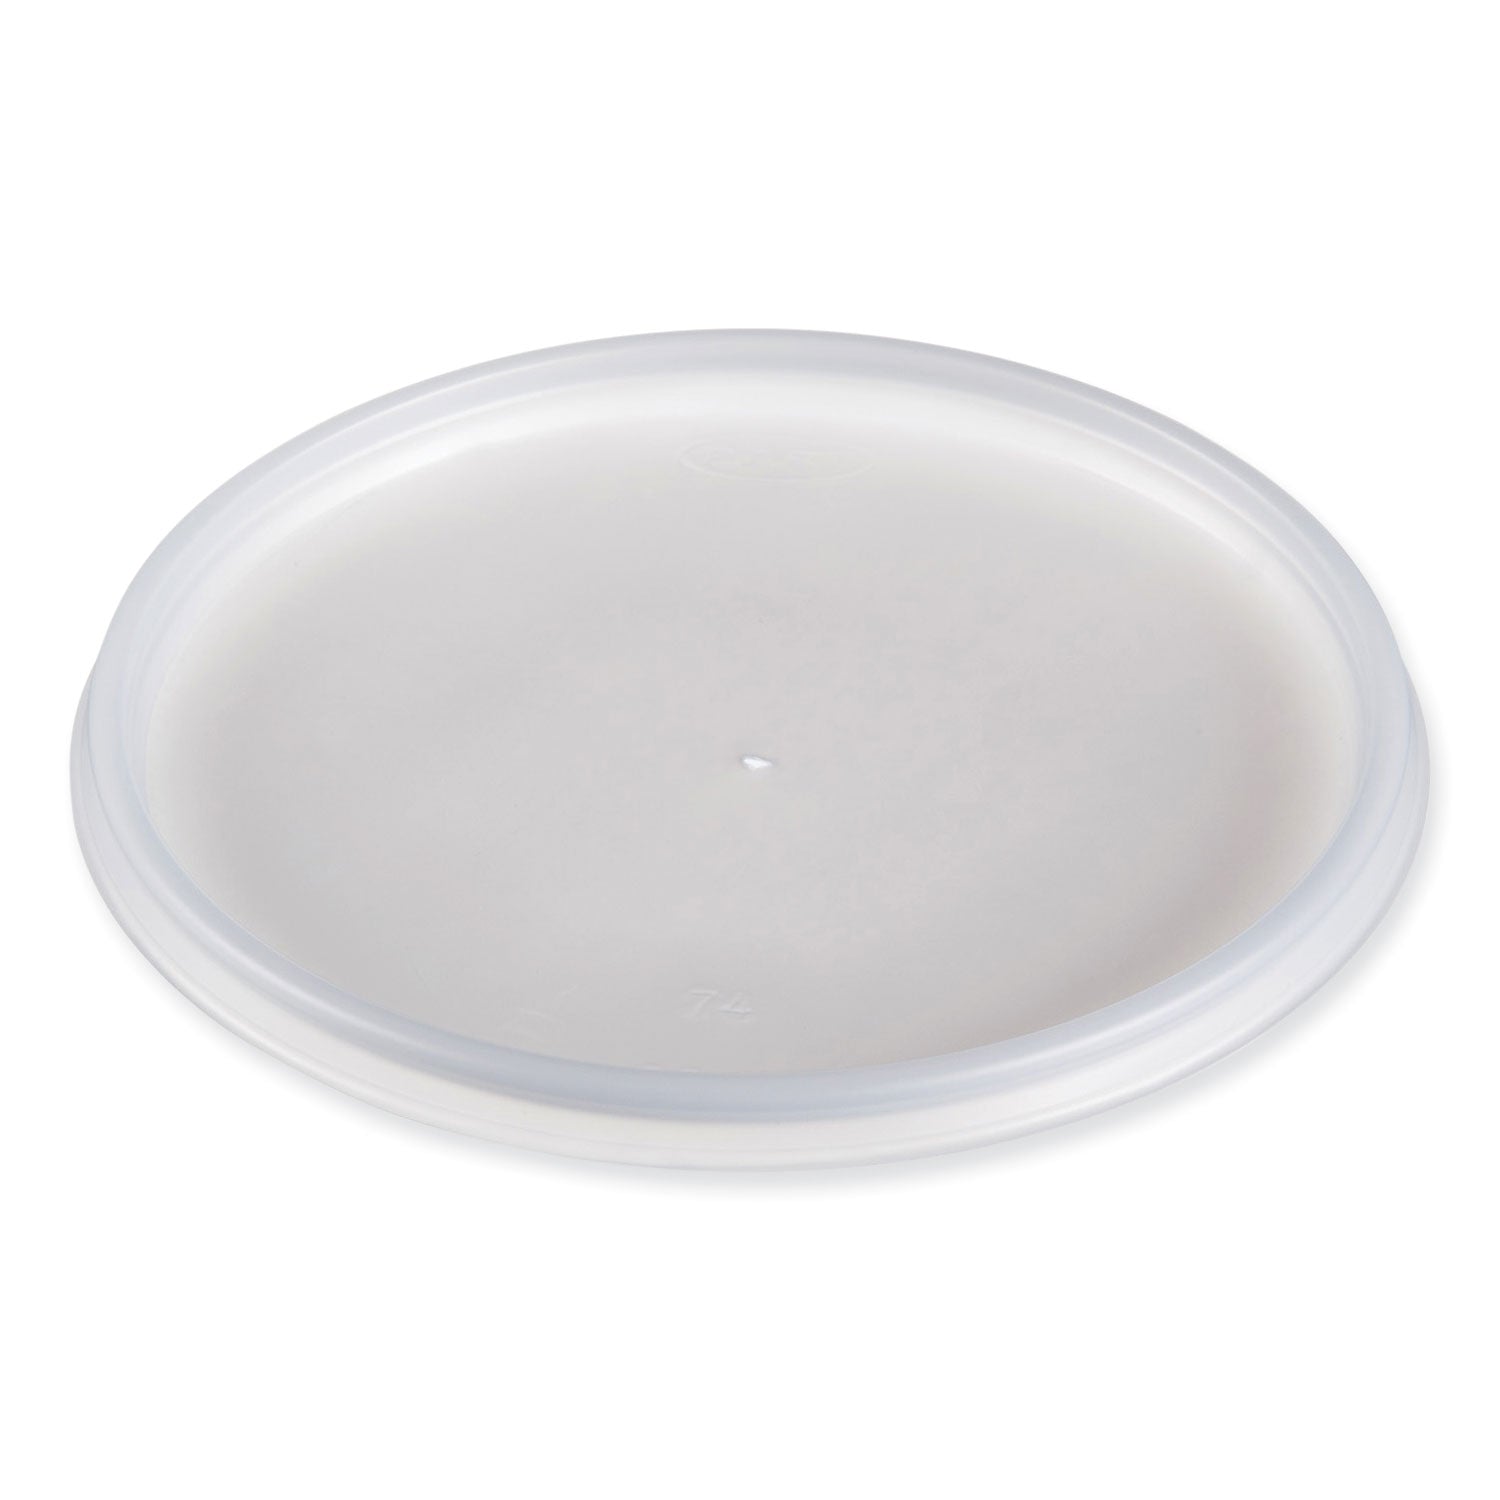 plastic-lids-for-foam-cups-bowls-and-containers-vented-fits-12-60-oz-translucent-100-pack-10-packs-carton_dcc32jlr - 1